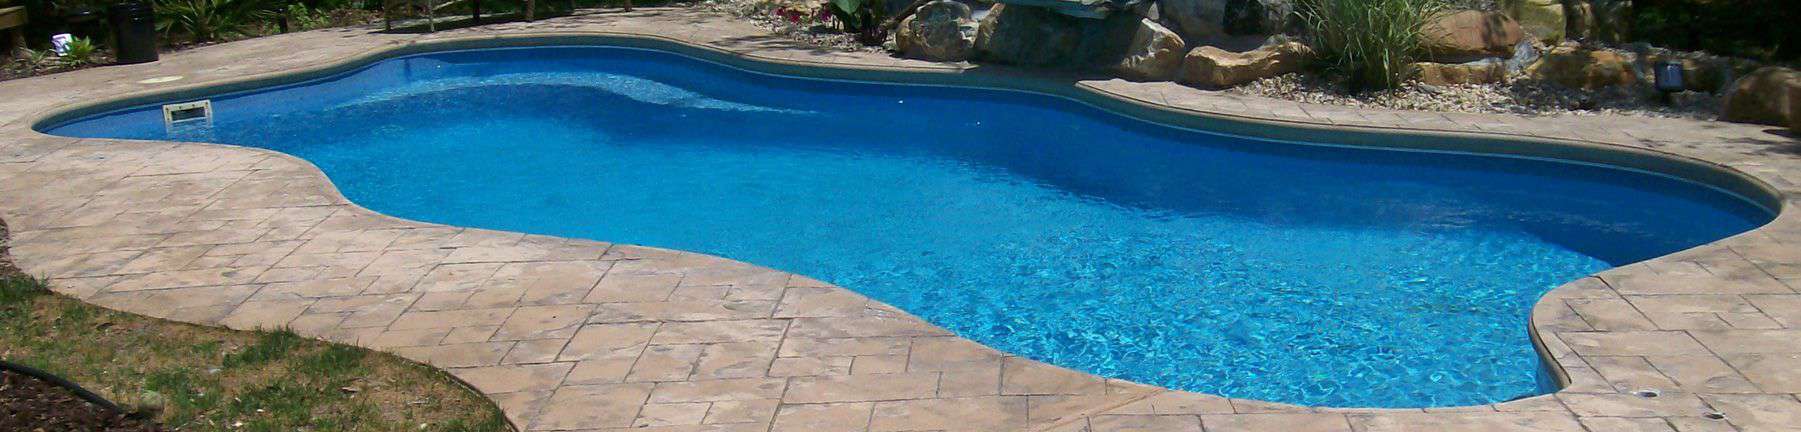 Stamped Concrete Contractor Fairport, NY